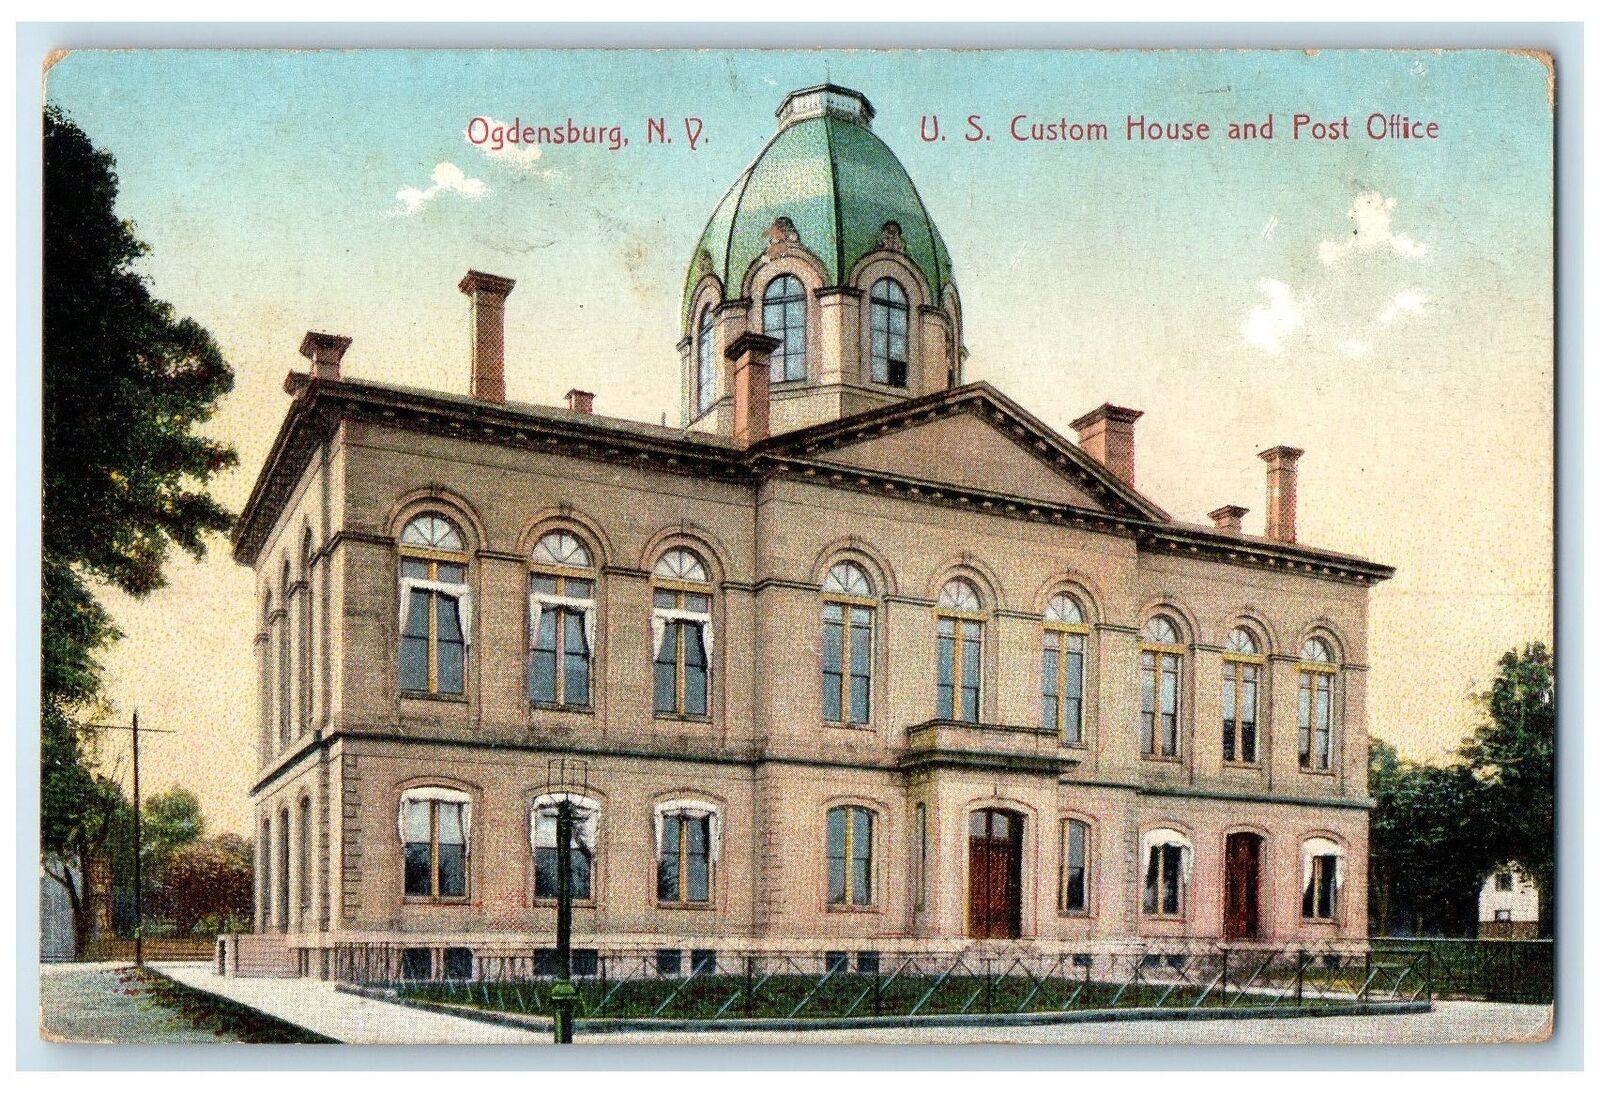 c1950's US Custom House And Post Office Building Ogdensburg New York NY Postcard